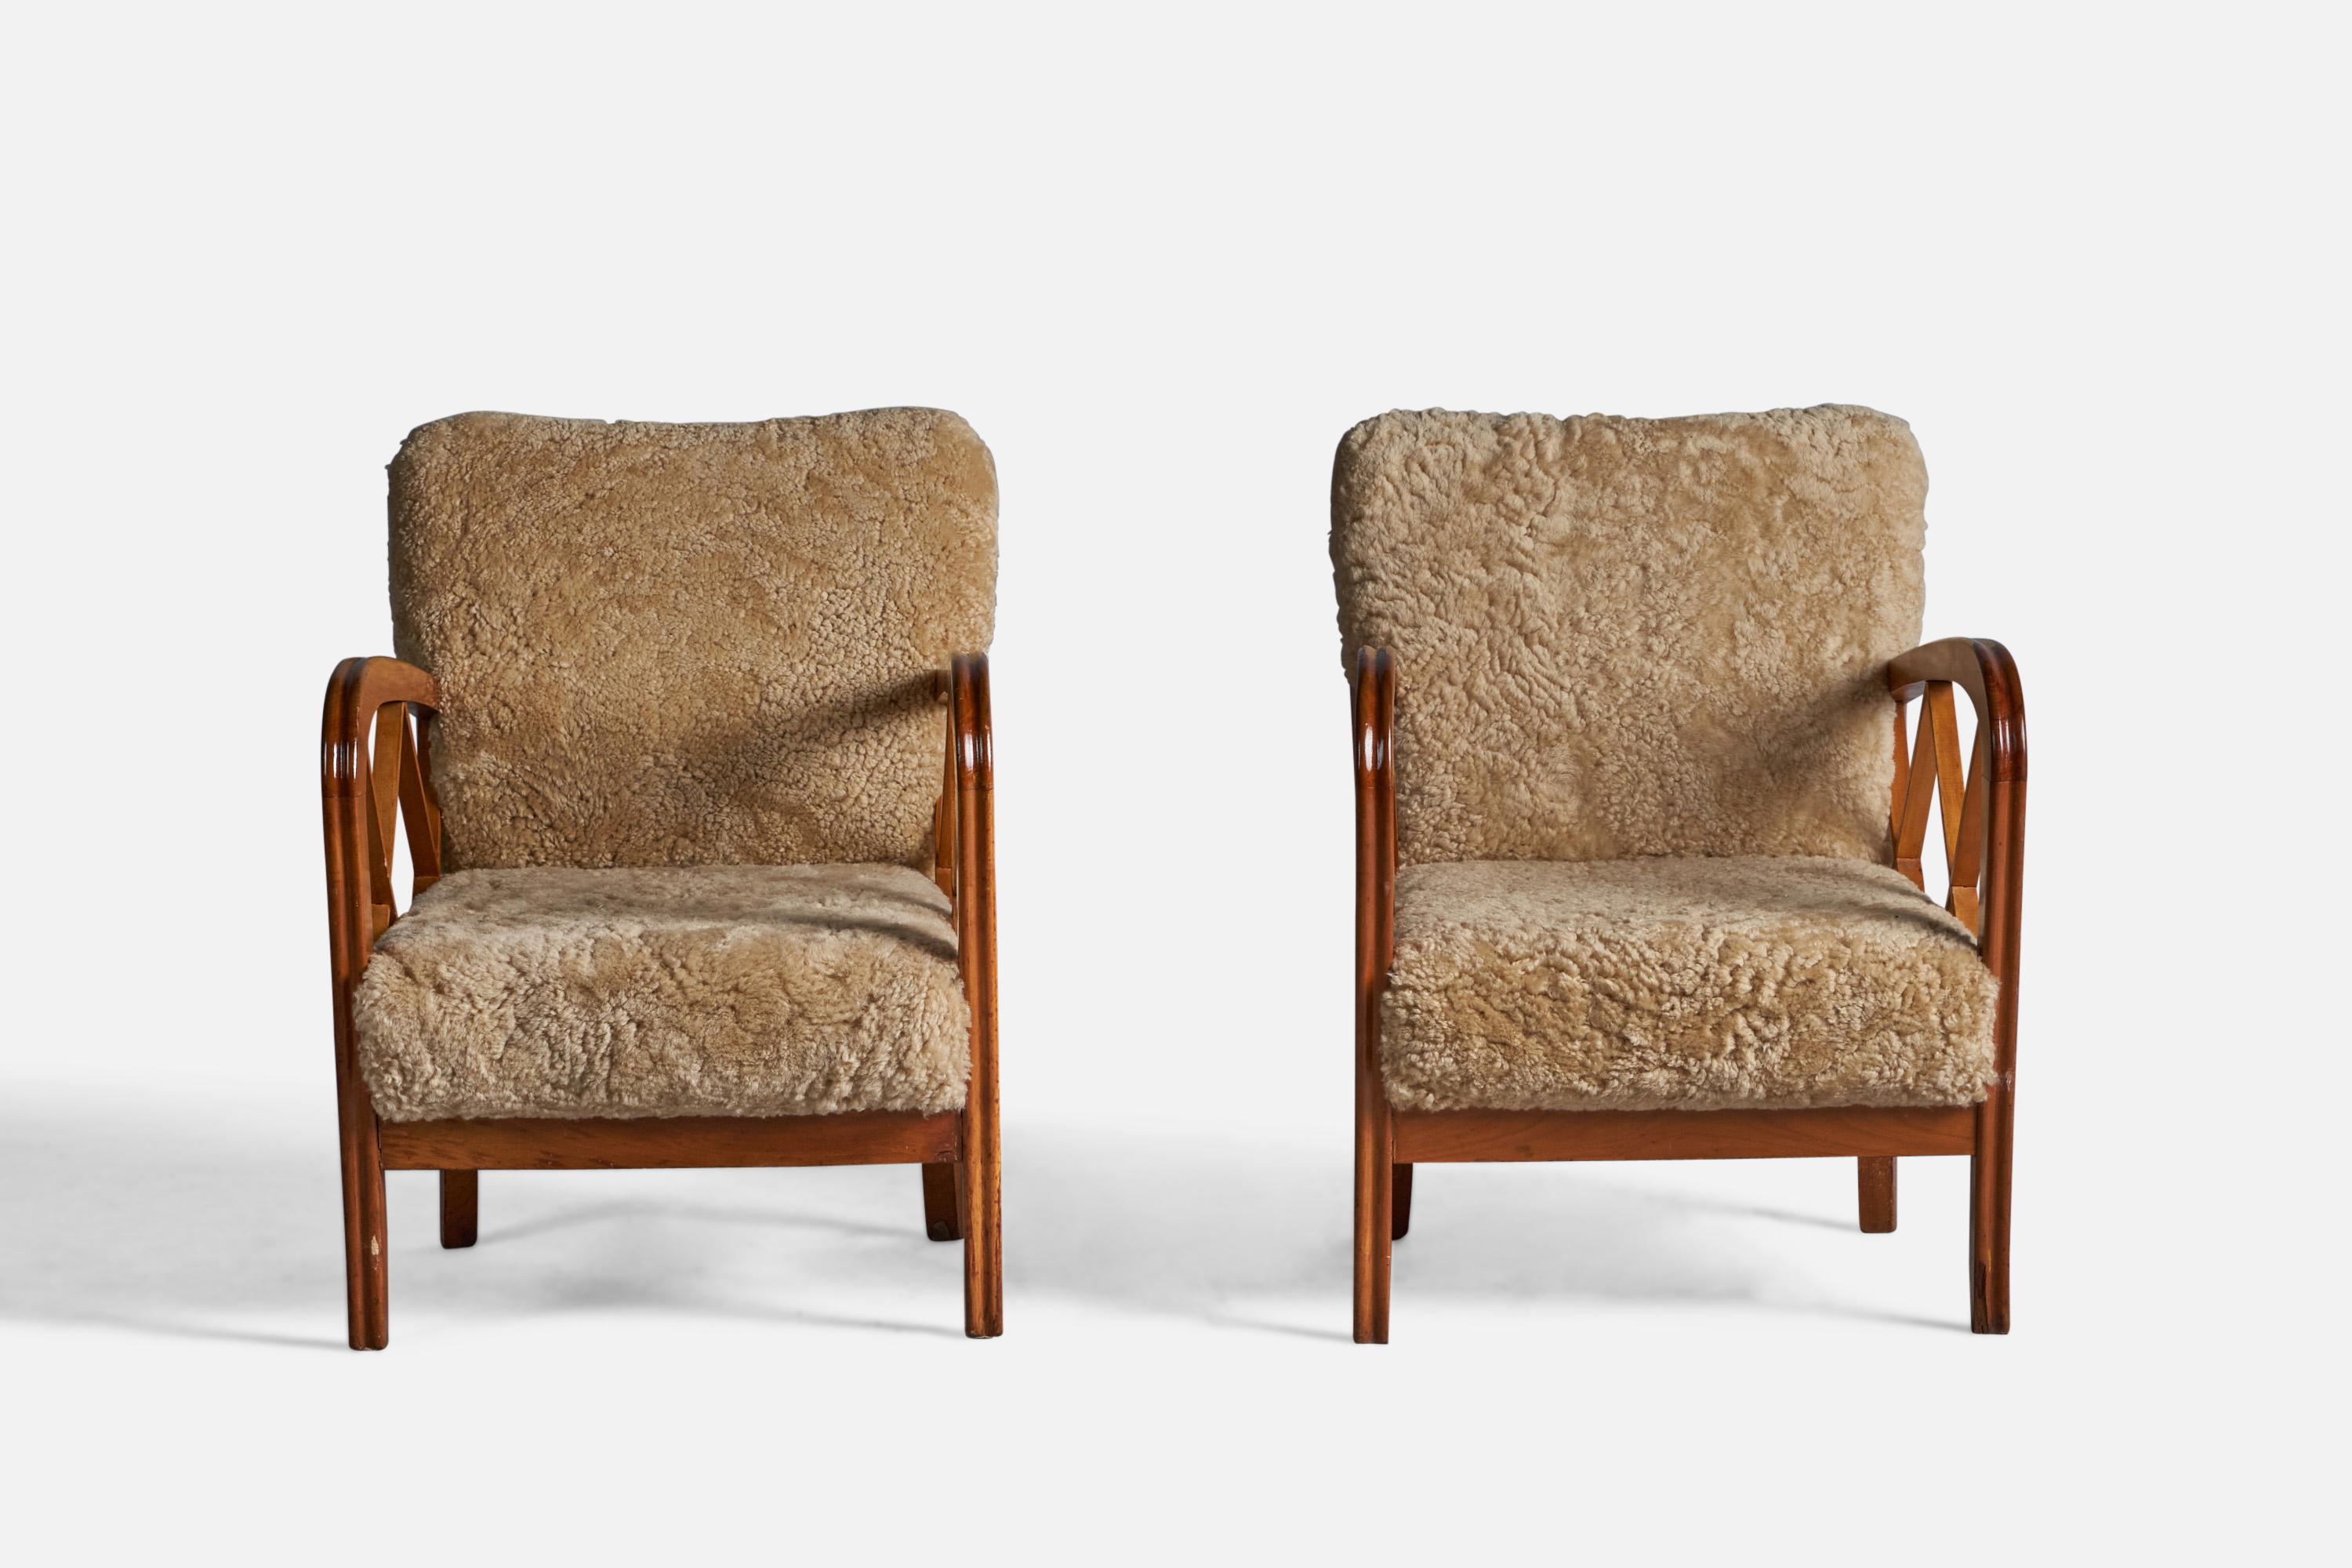 Mid-20th Century Paolo Buffa Attribution, Lounge Chairs, Walnut, Shearling, Italy, 1940s For Sale